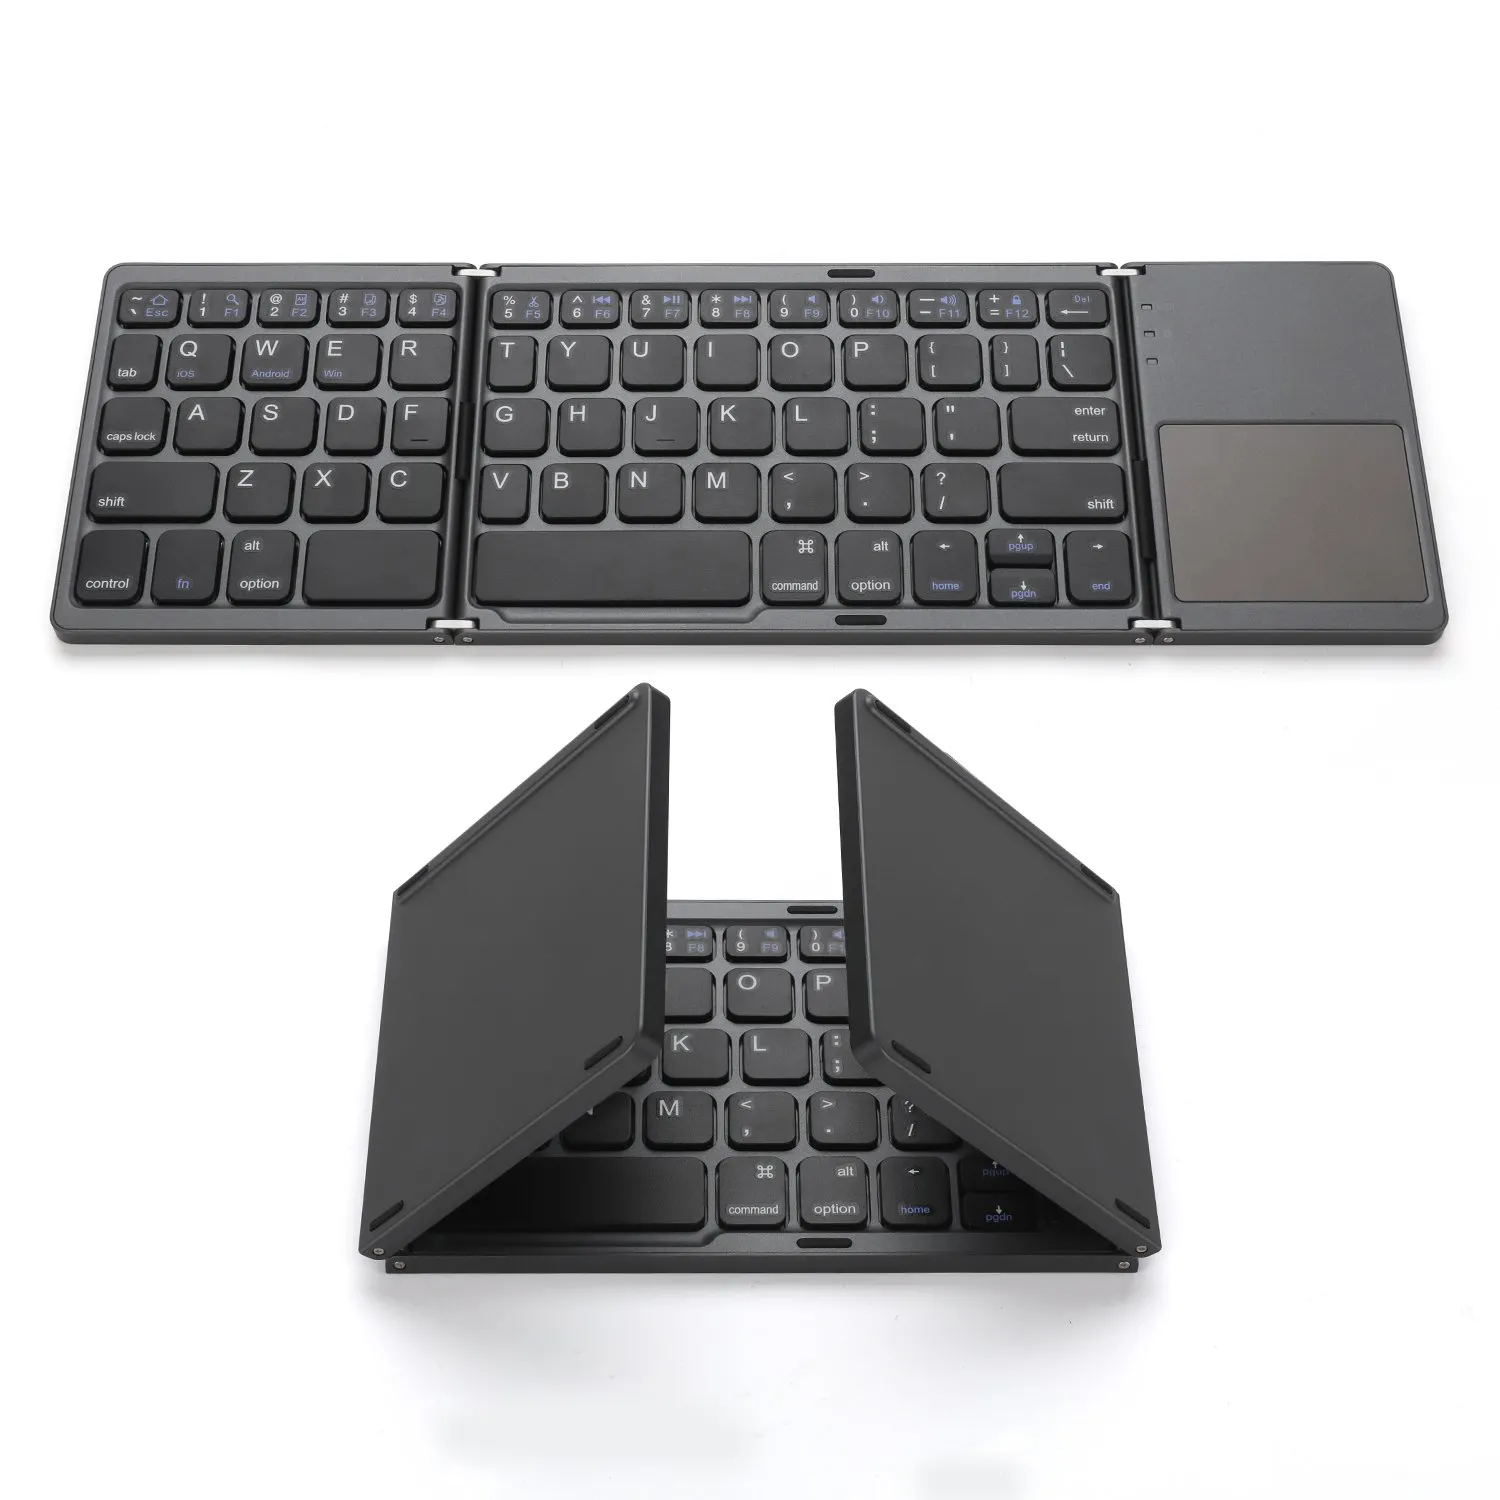 three Level Foldable Blue tooth Touchpad Keyboard for ipad ios 13 android tablet pc Mobile phone portable folding keyboard